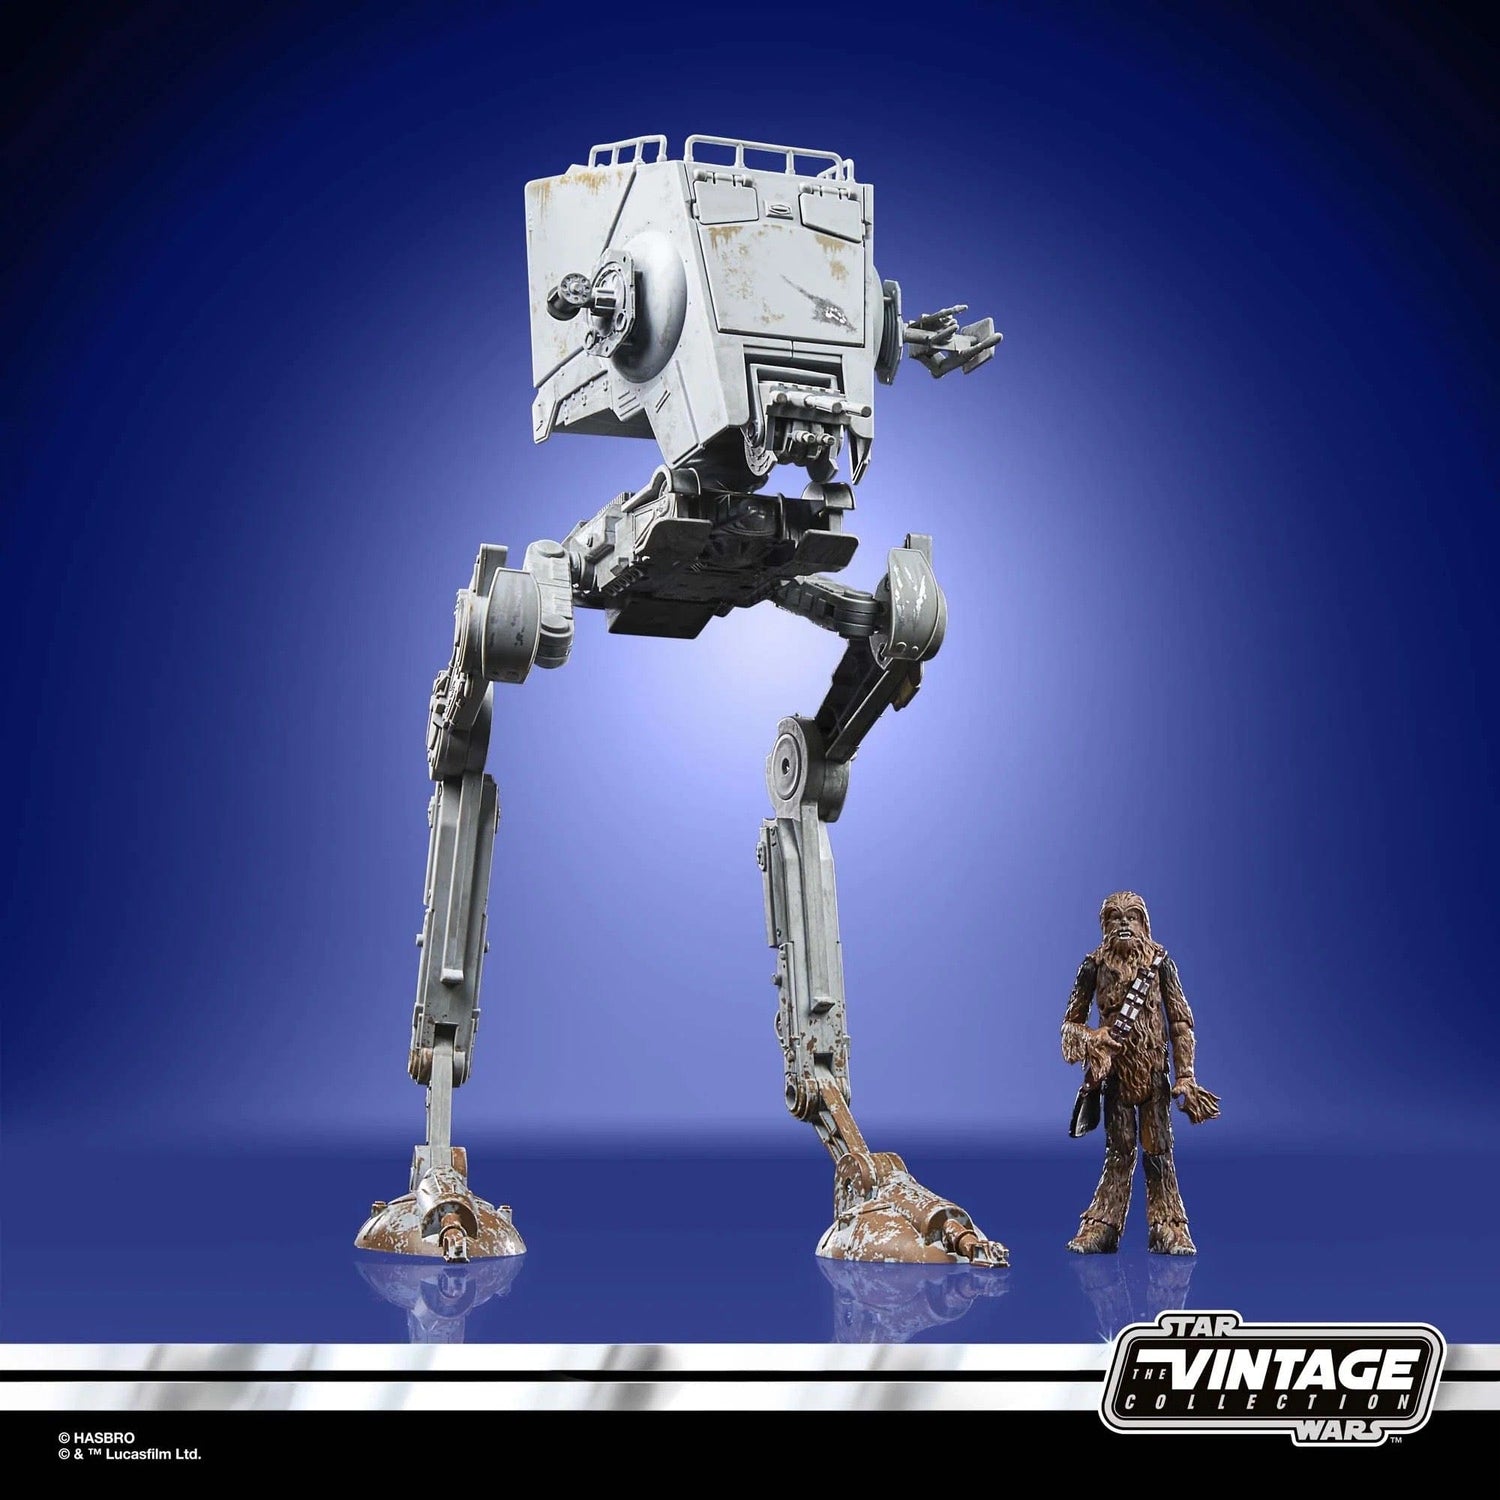 Star Wars The Vintage Collection Return of the Jedi AT-ST and Chewbacca Action Figure Set